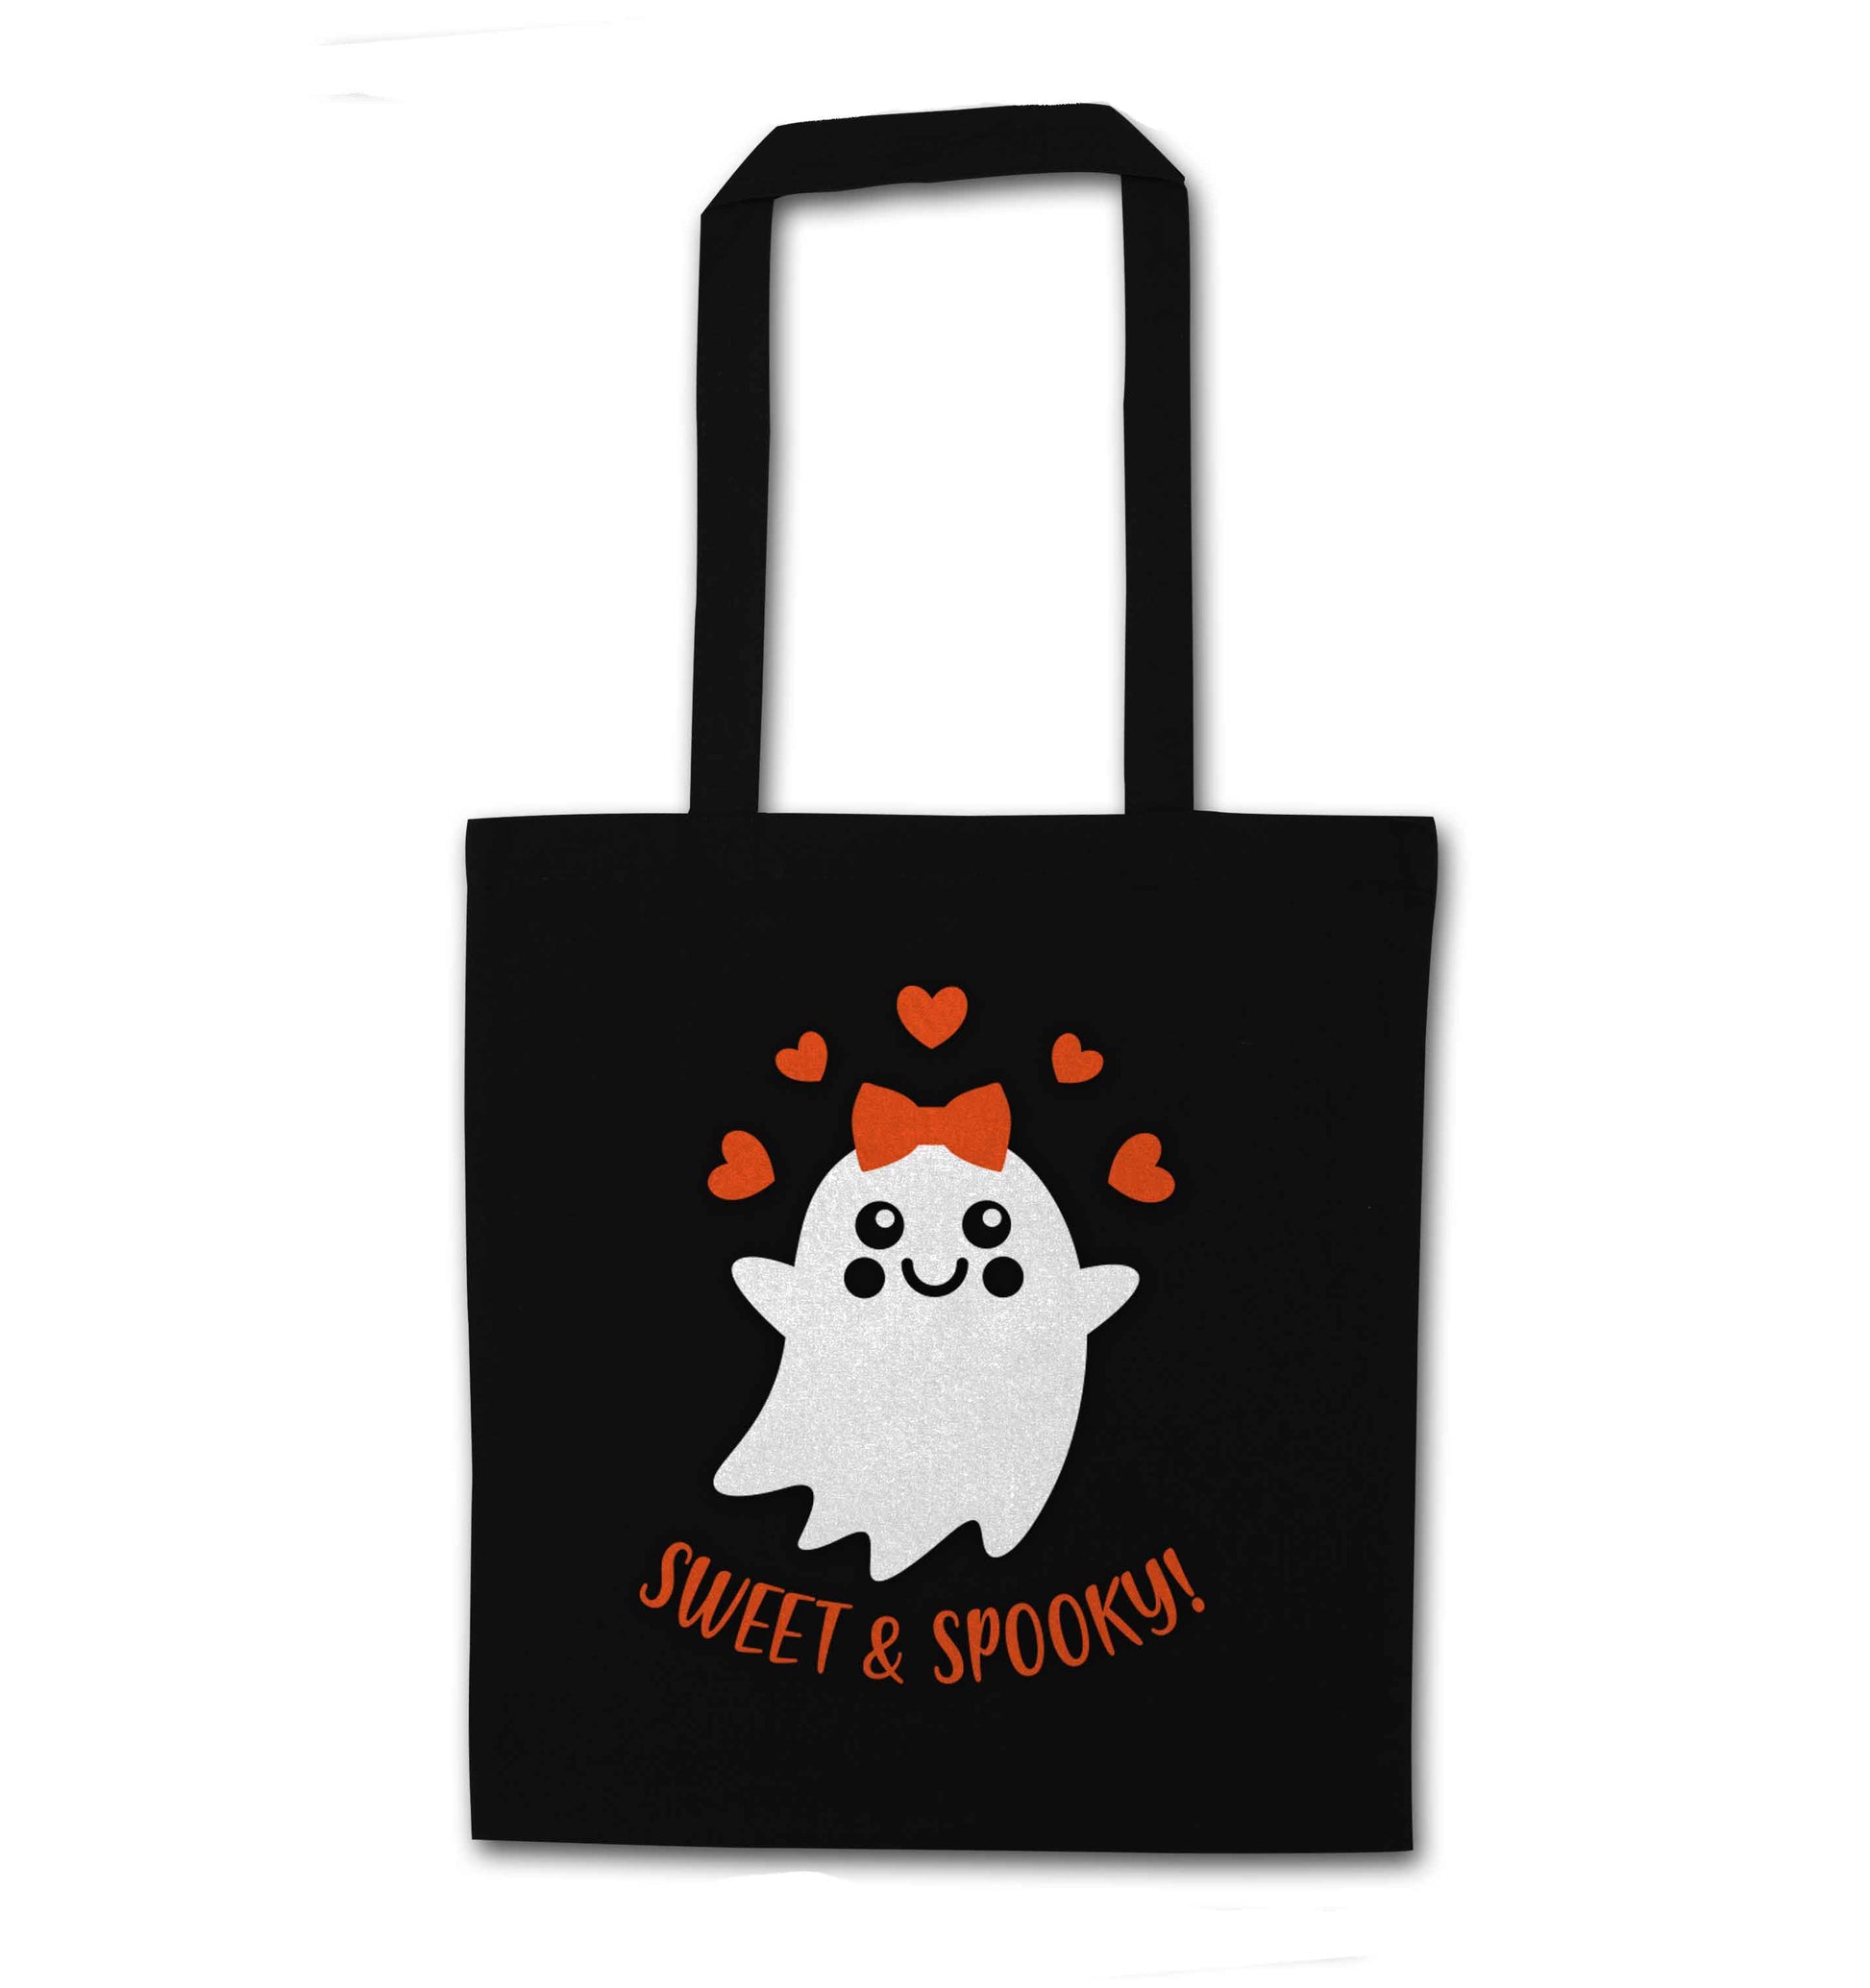 Sweet and spooky black tote bag